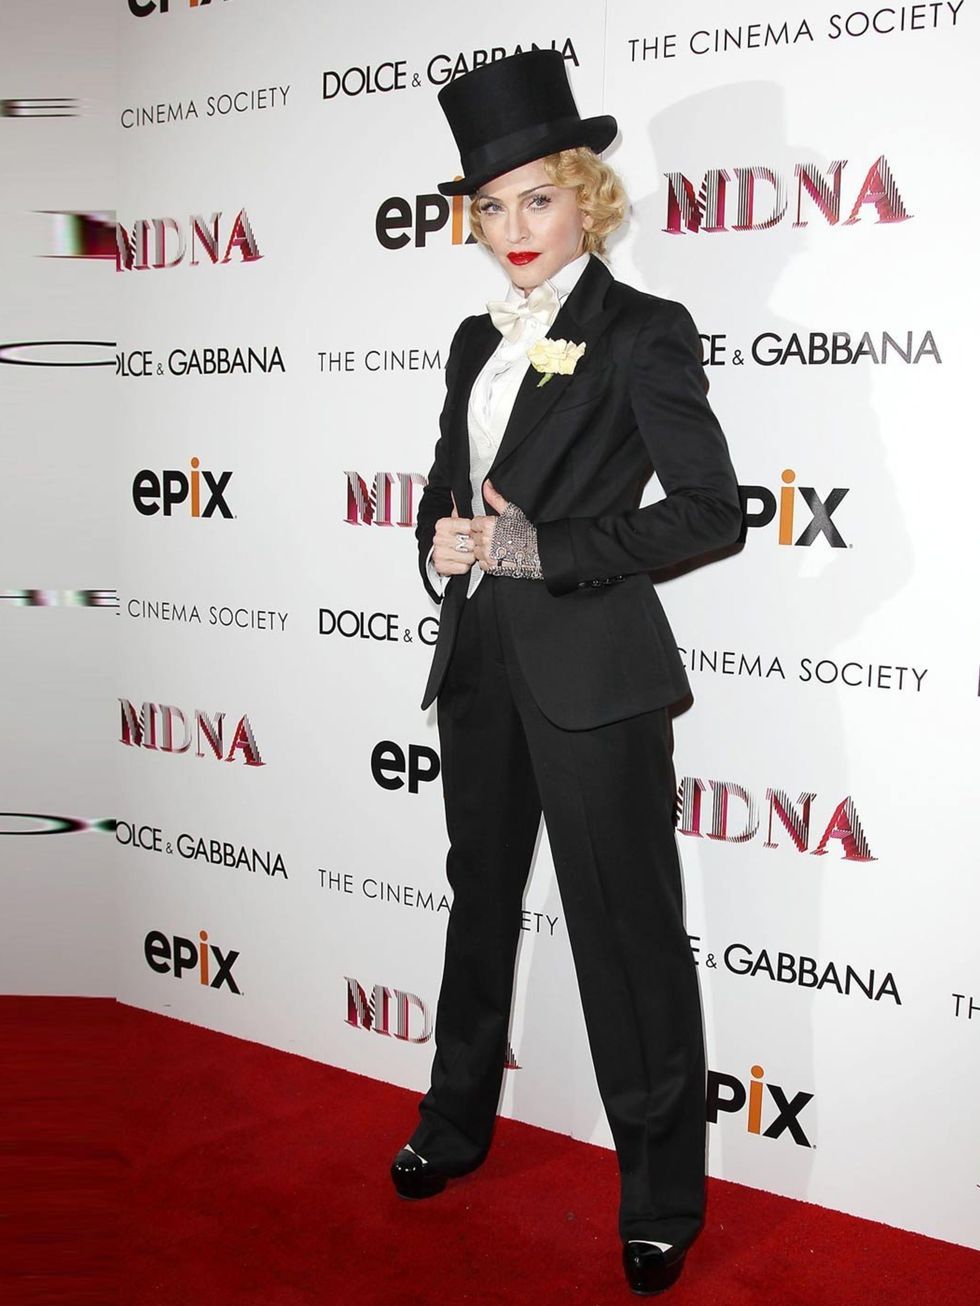 <p>Madonna wore a three piece suite by <a href="attended%20the%20Dolce%20&amp;%20Gabbana%20and%20The%20Cinema%20Society%20screening%20of%20the%20Epix%20world%20premiere%20of%20%E2%80%98Madonna%3A%20The%20MDNA%20Tour%E2%80%99%20at%20The%20Paris%20Theatre%2